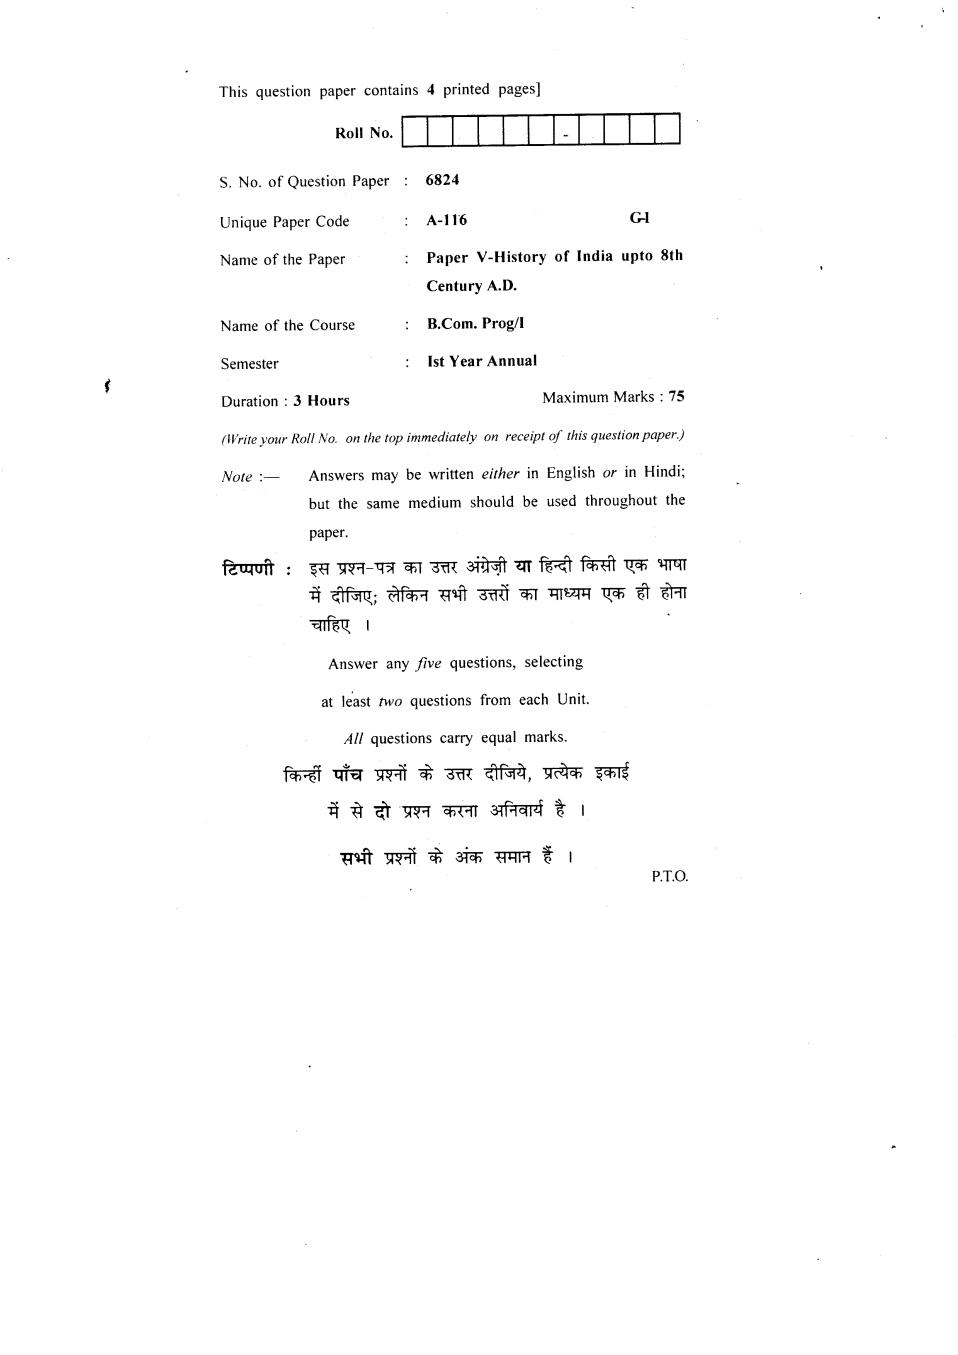 DU SOL B.Com Question Paper 1st Year 2018 History - Page 1